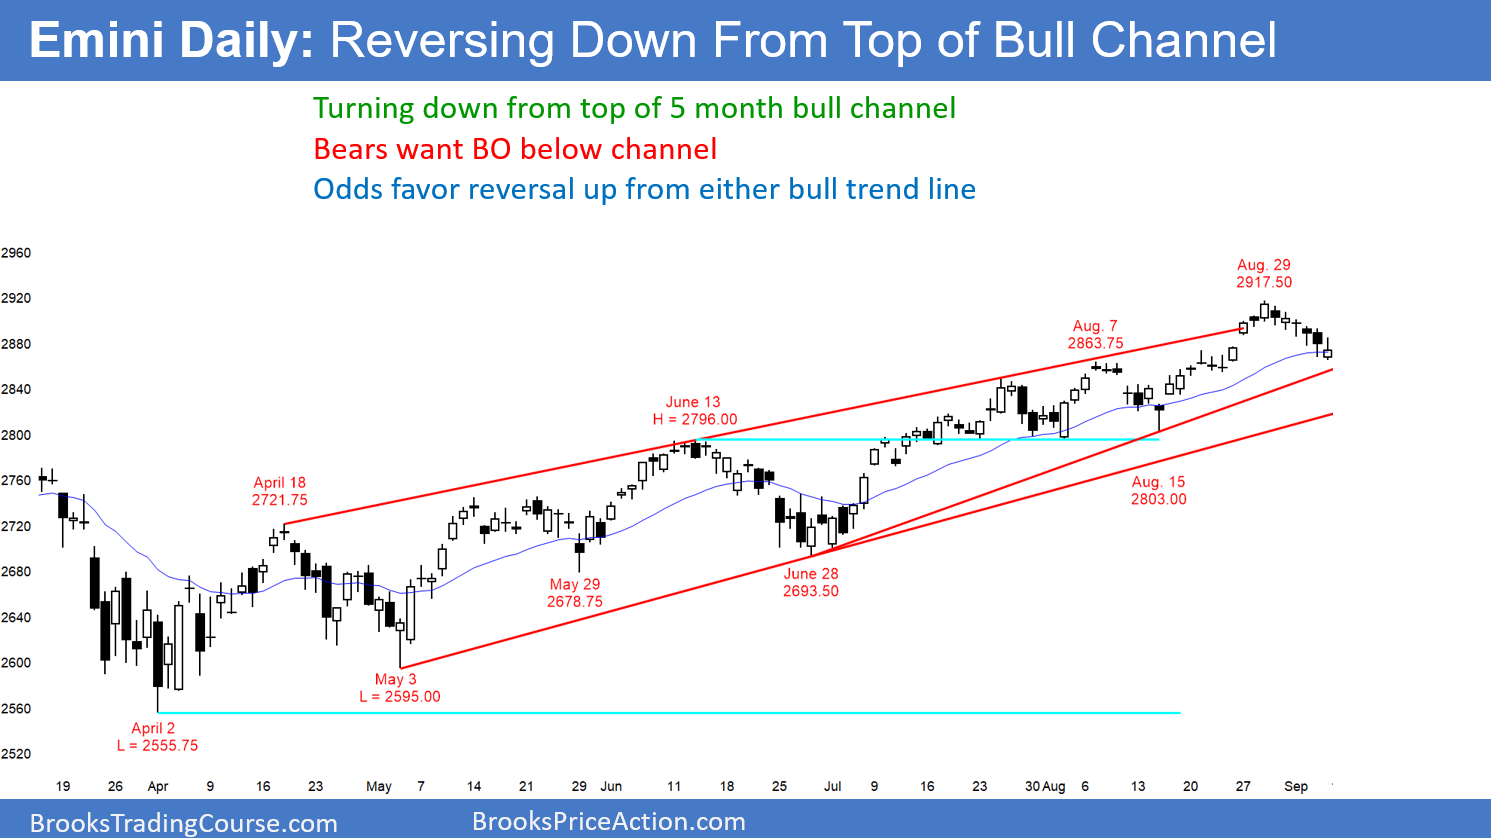 Emini Daily Chart Reversing Down From Top Of Bull Channel